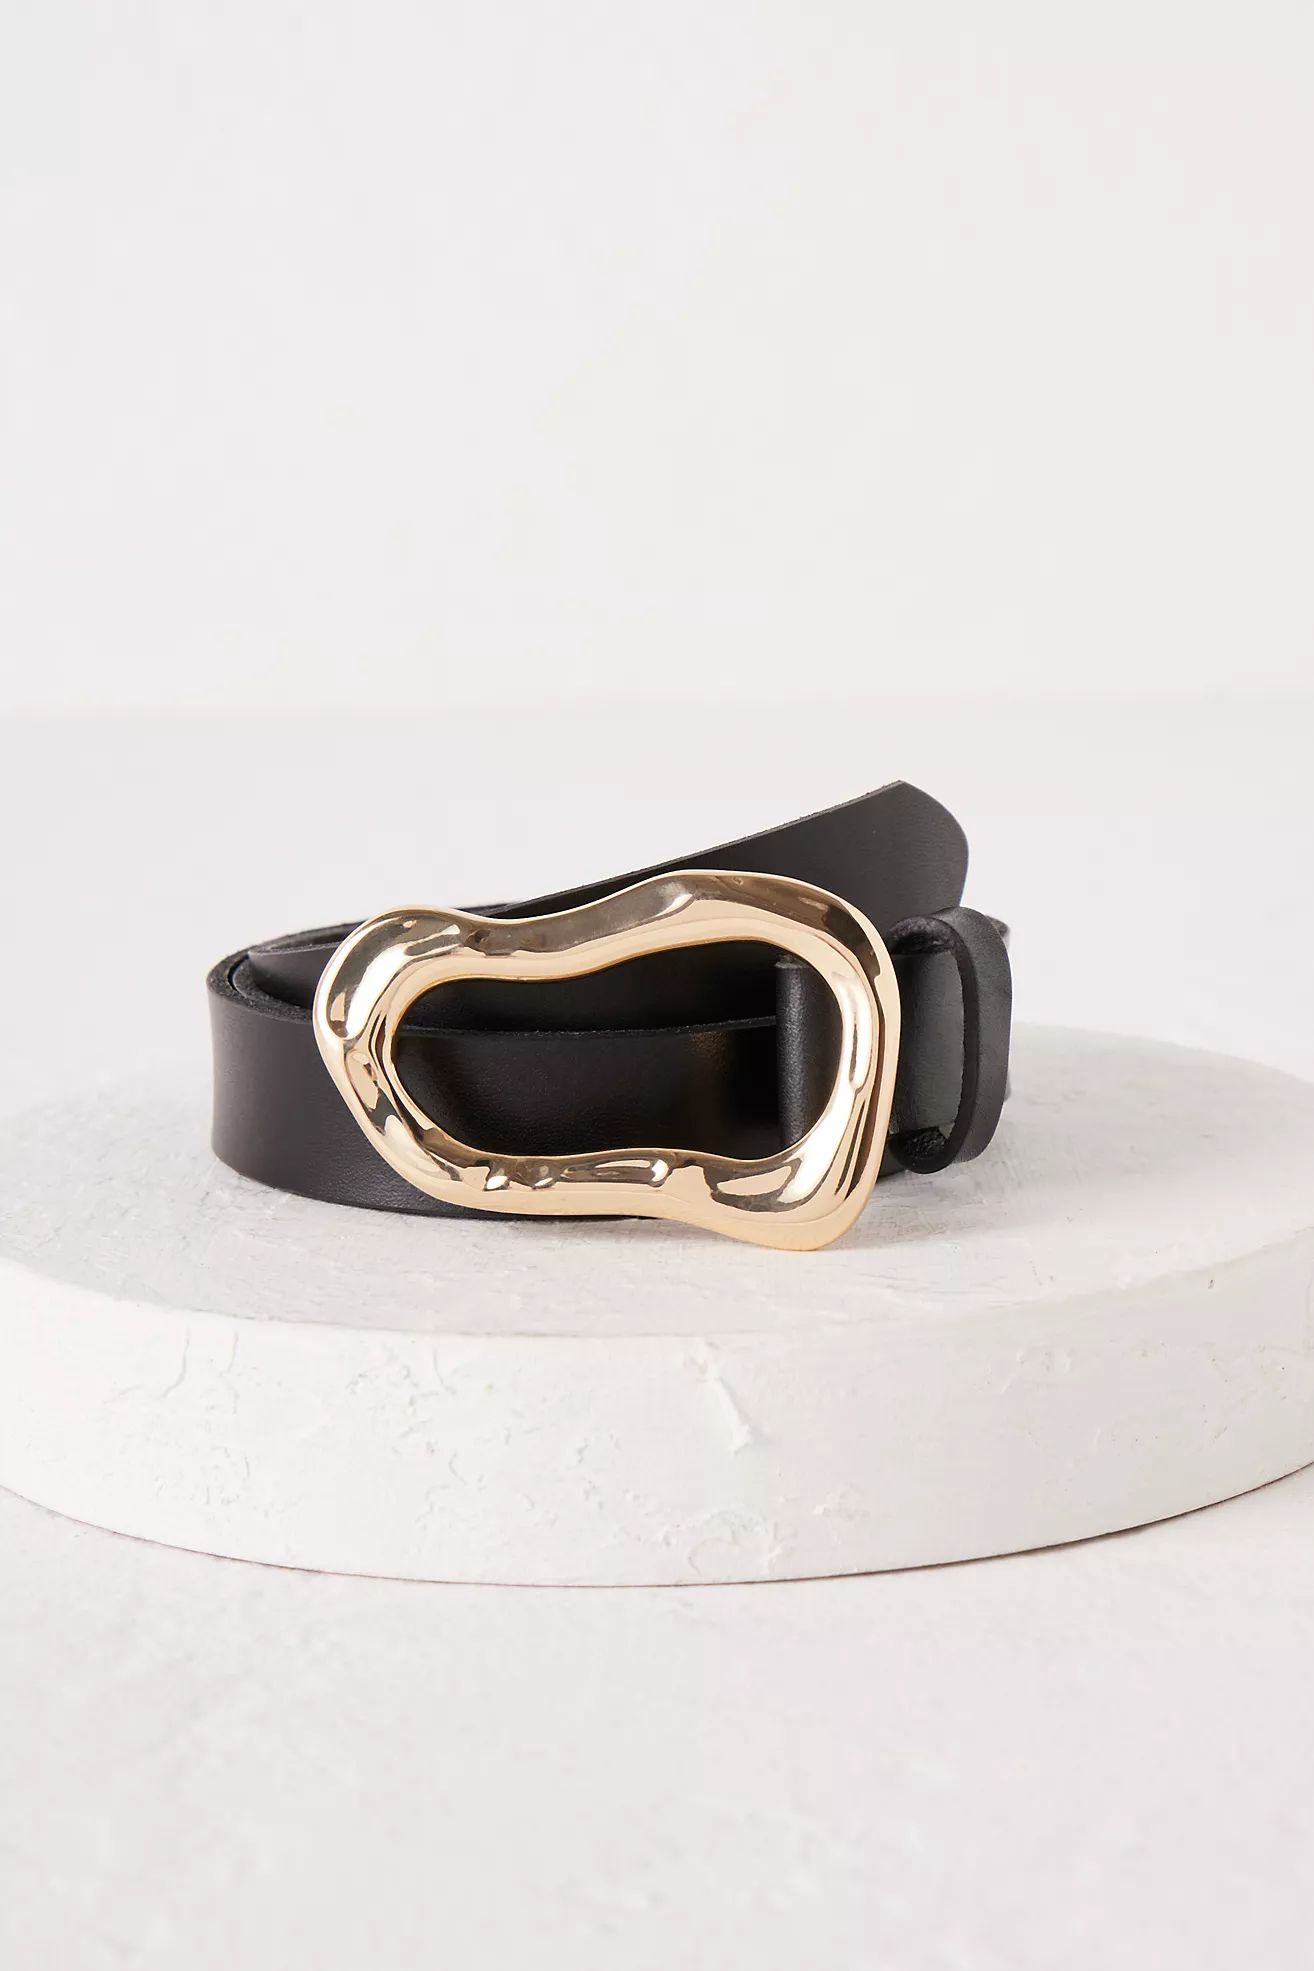 By Anthropologie Structural Buckle Belt | Anthropologie (US)